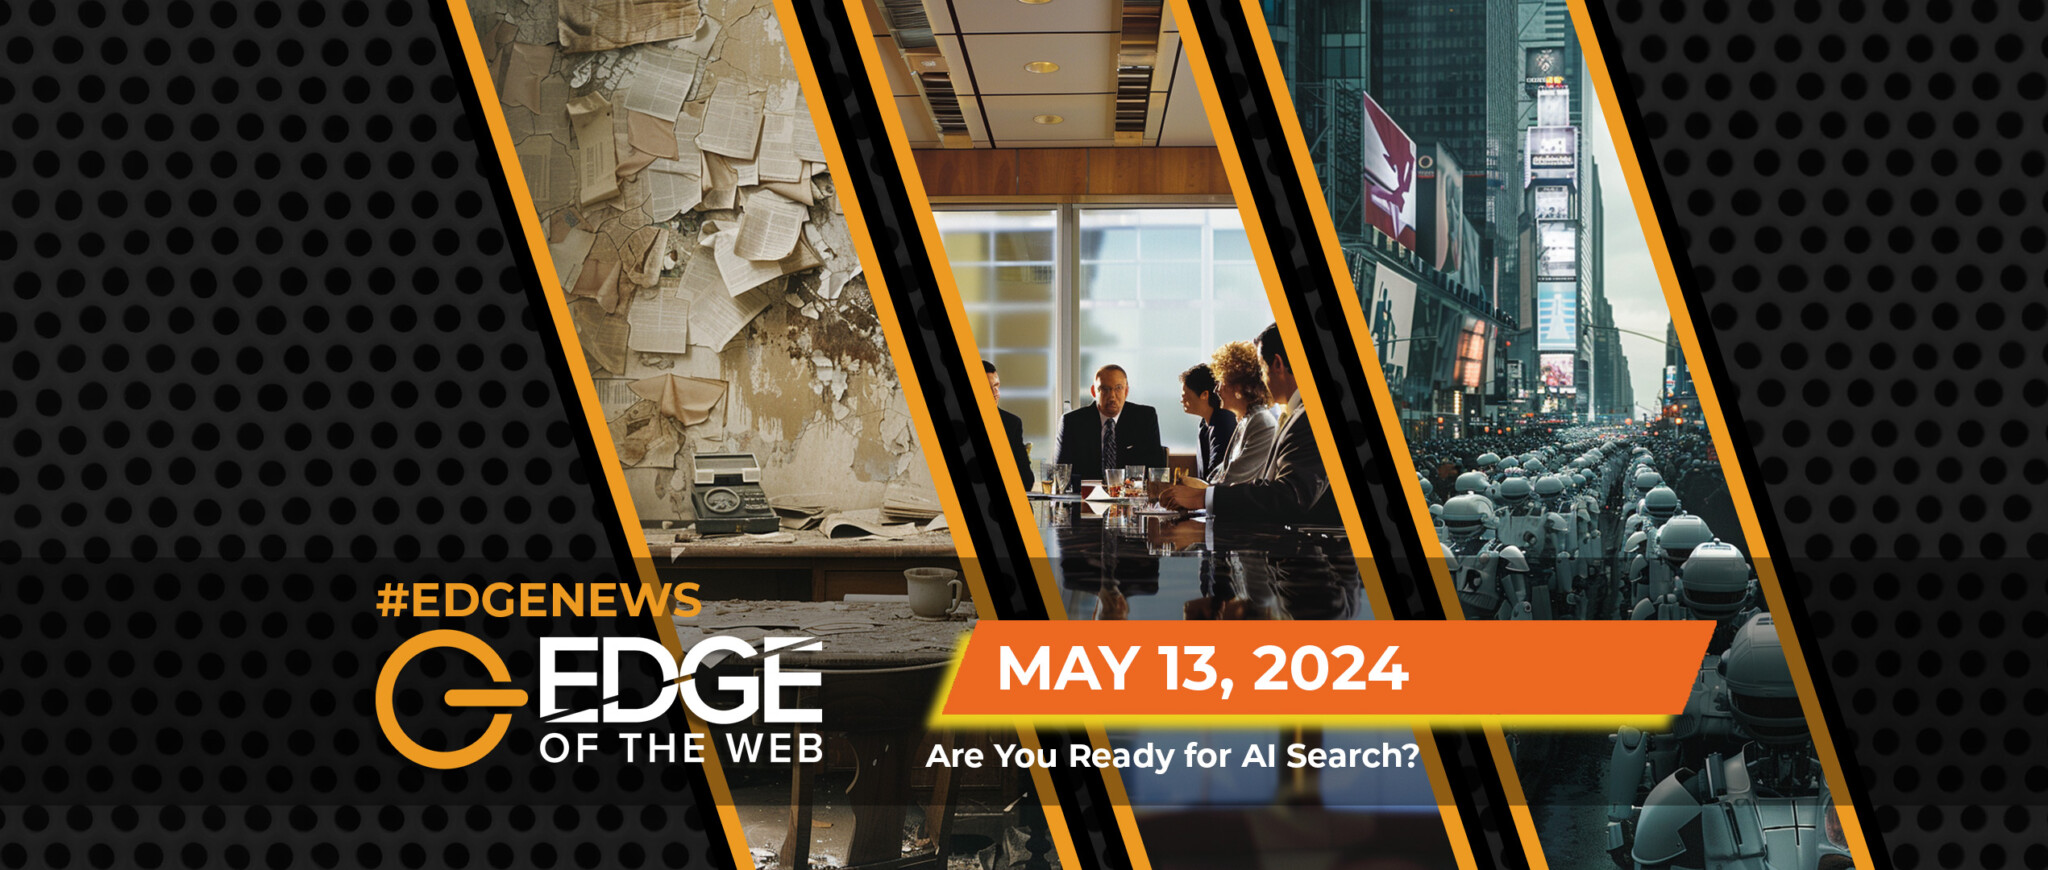 683 | News from the EDGE | Week of 5.13.2024